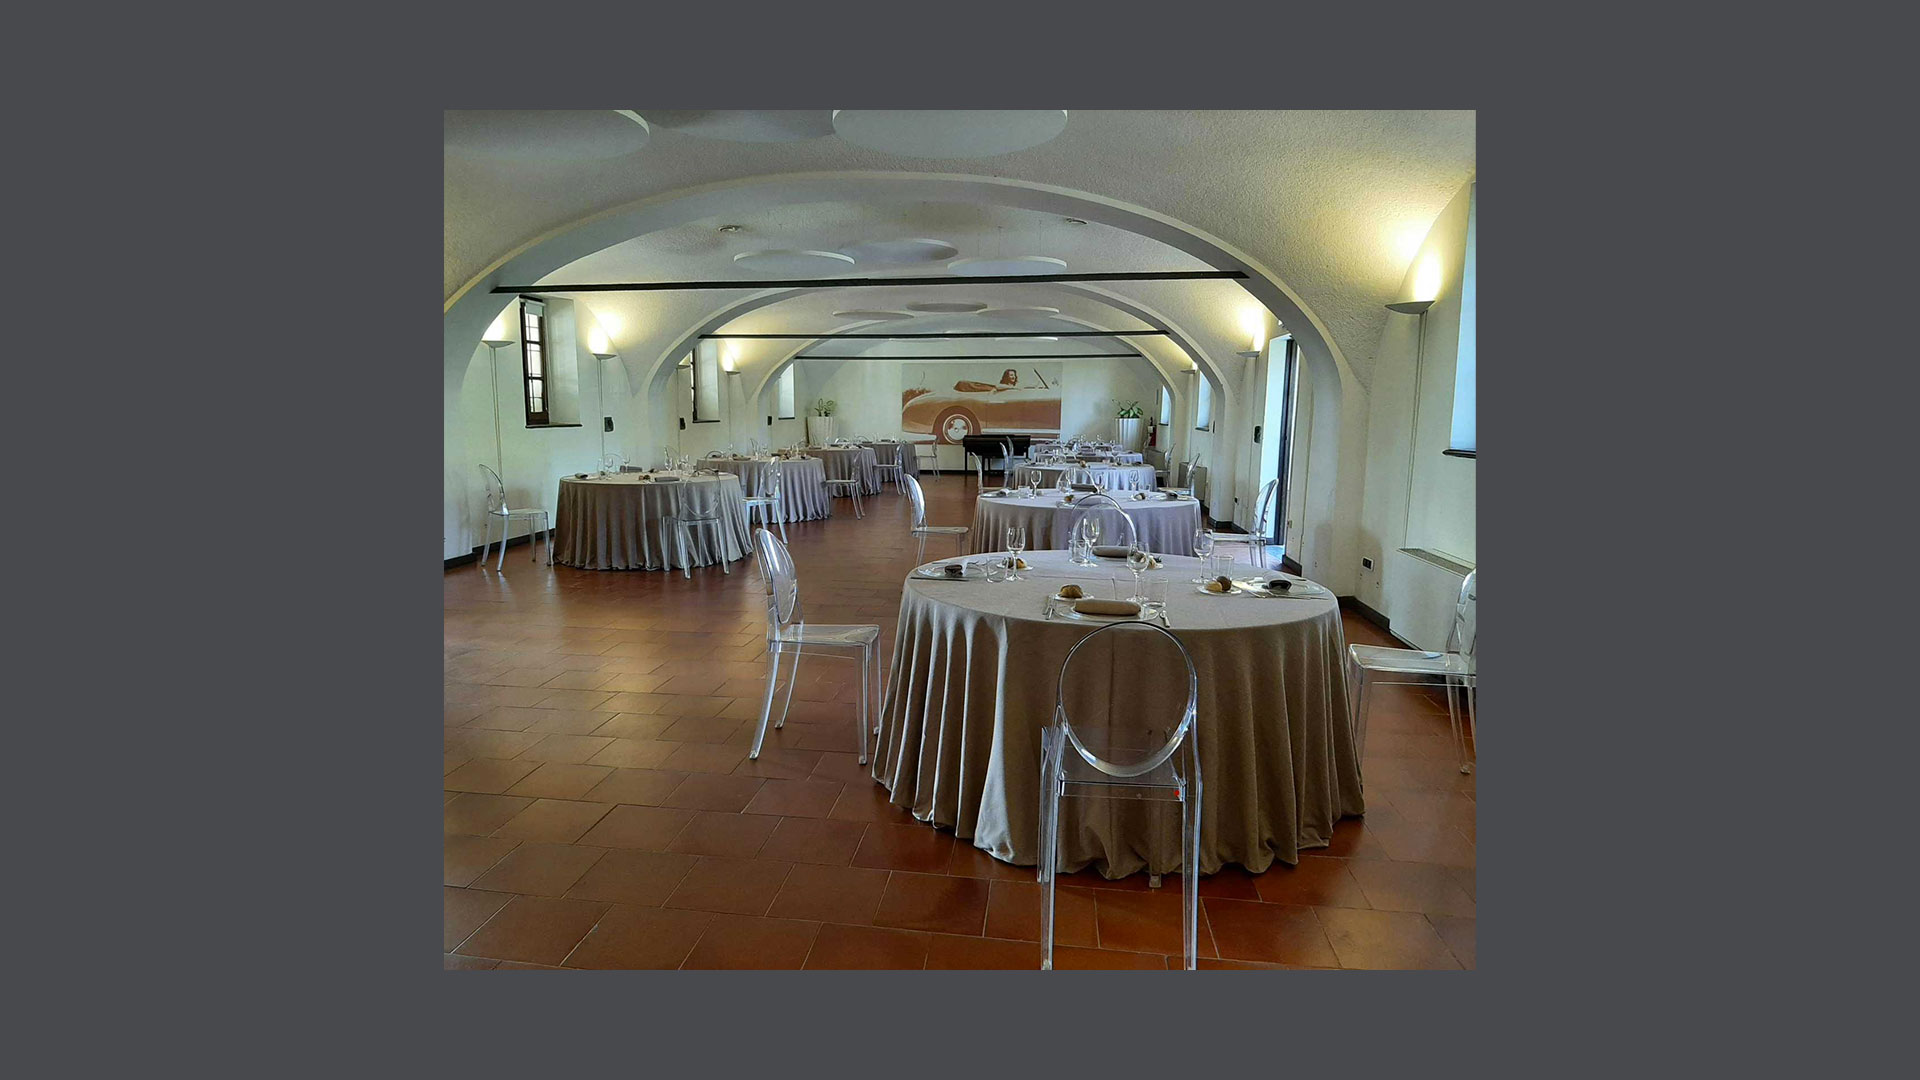 Photos of the Camino room furnished for catering services